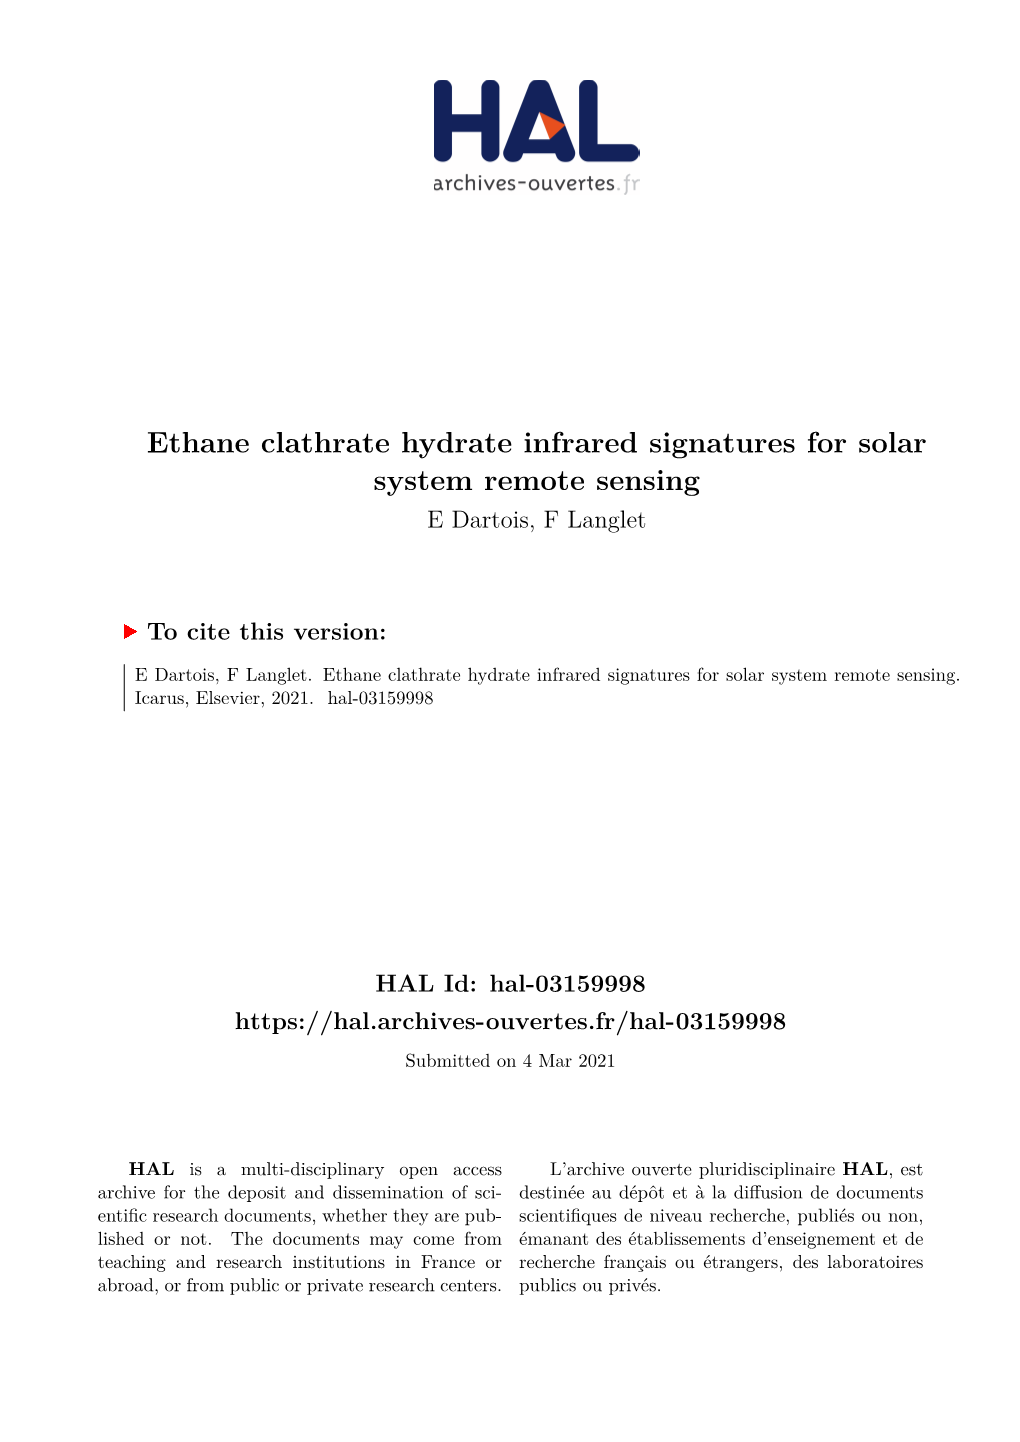 Ethane Clathrate Hydrate Infrared Signatures for Solar System Remote Sensing E Dartois, F Langlet